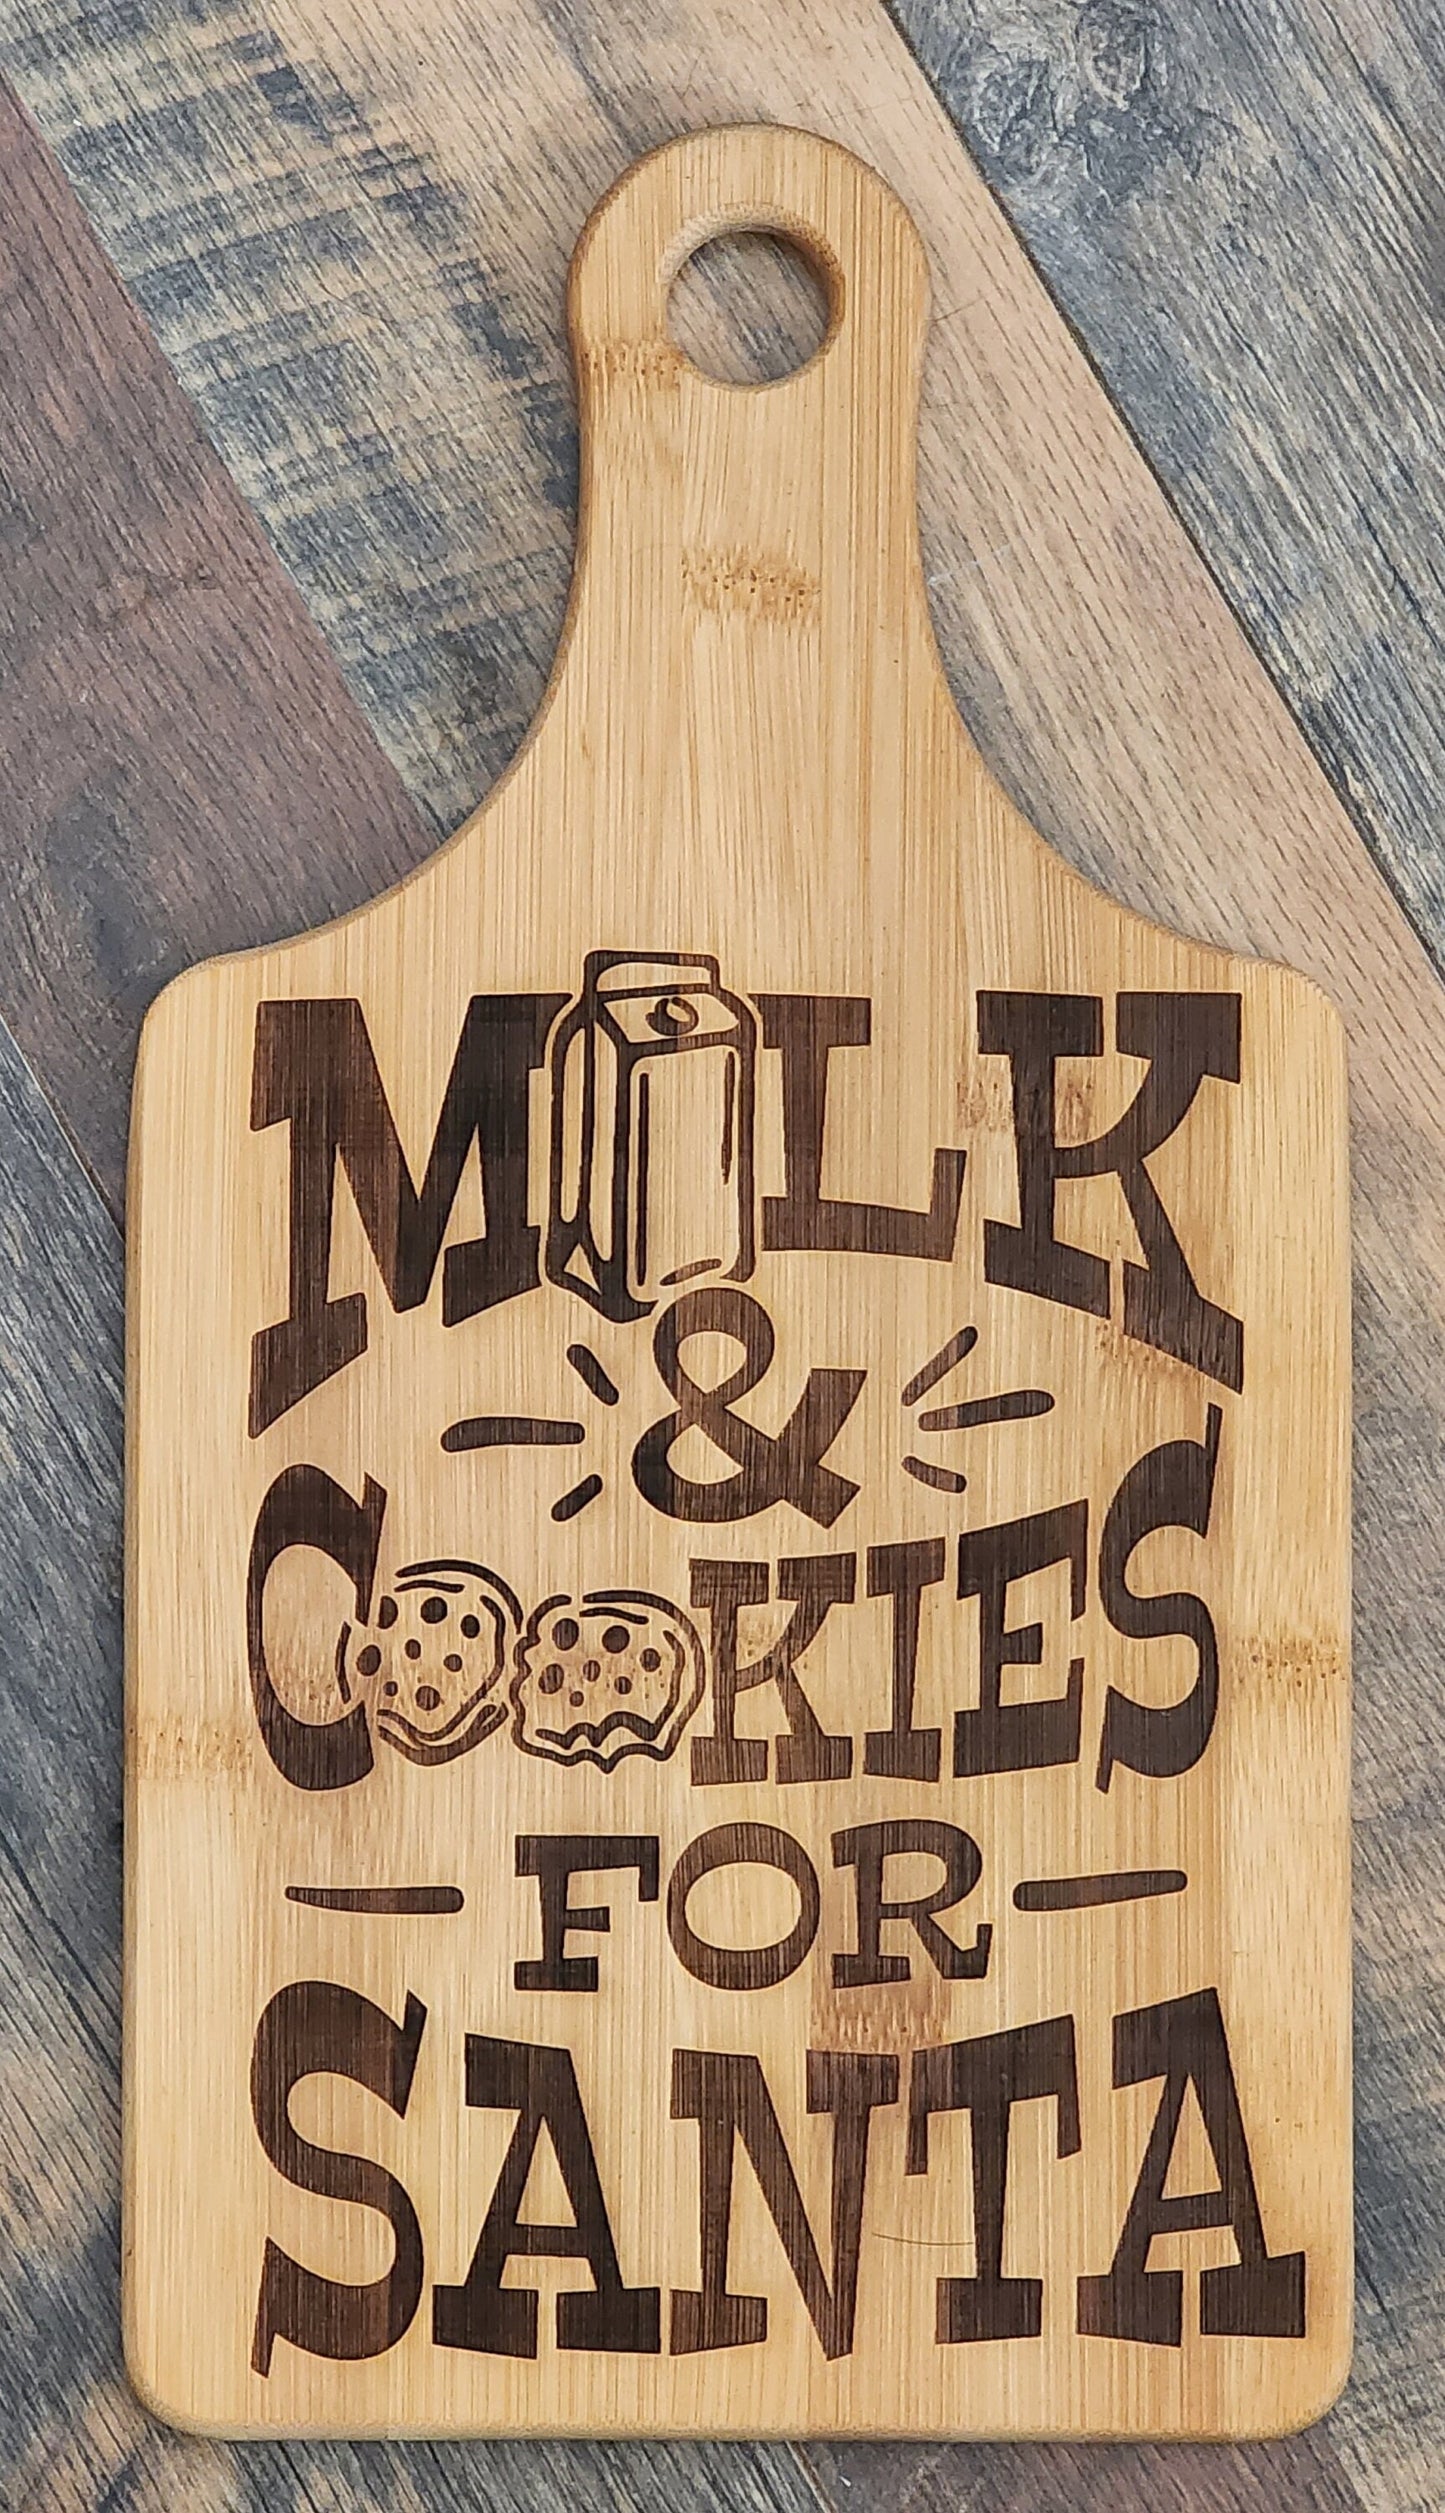 Milk and Cookies for Santa bamboo cutting board, serving board